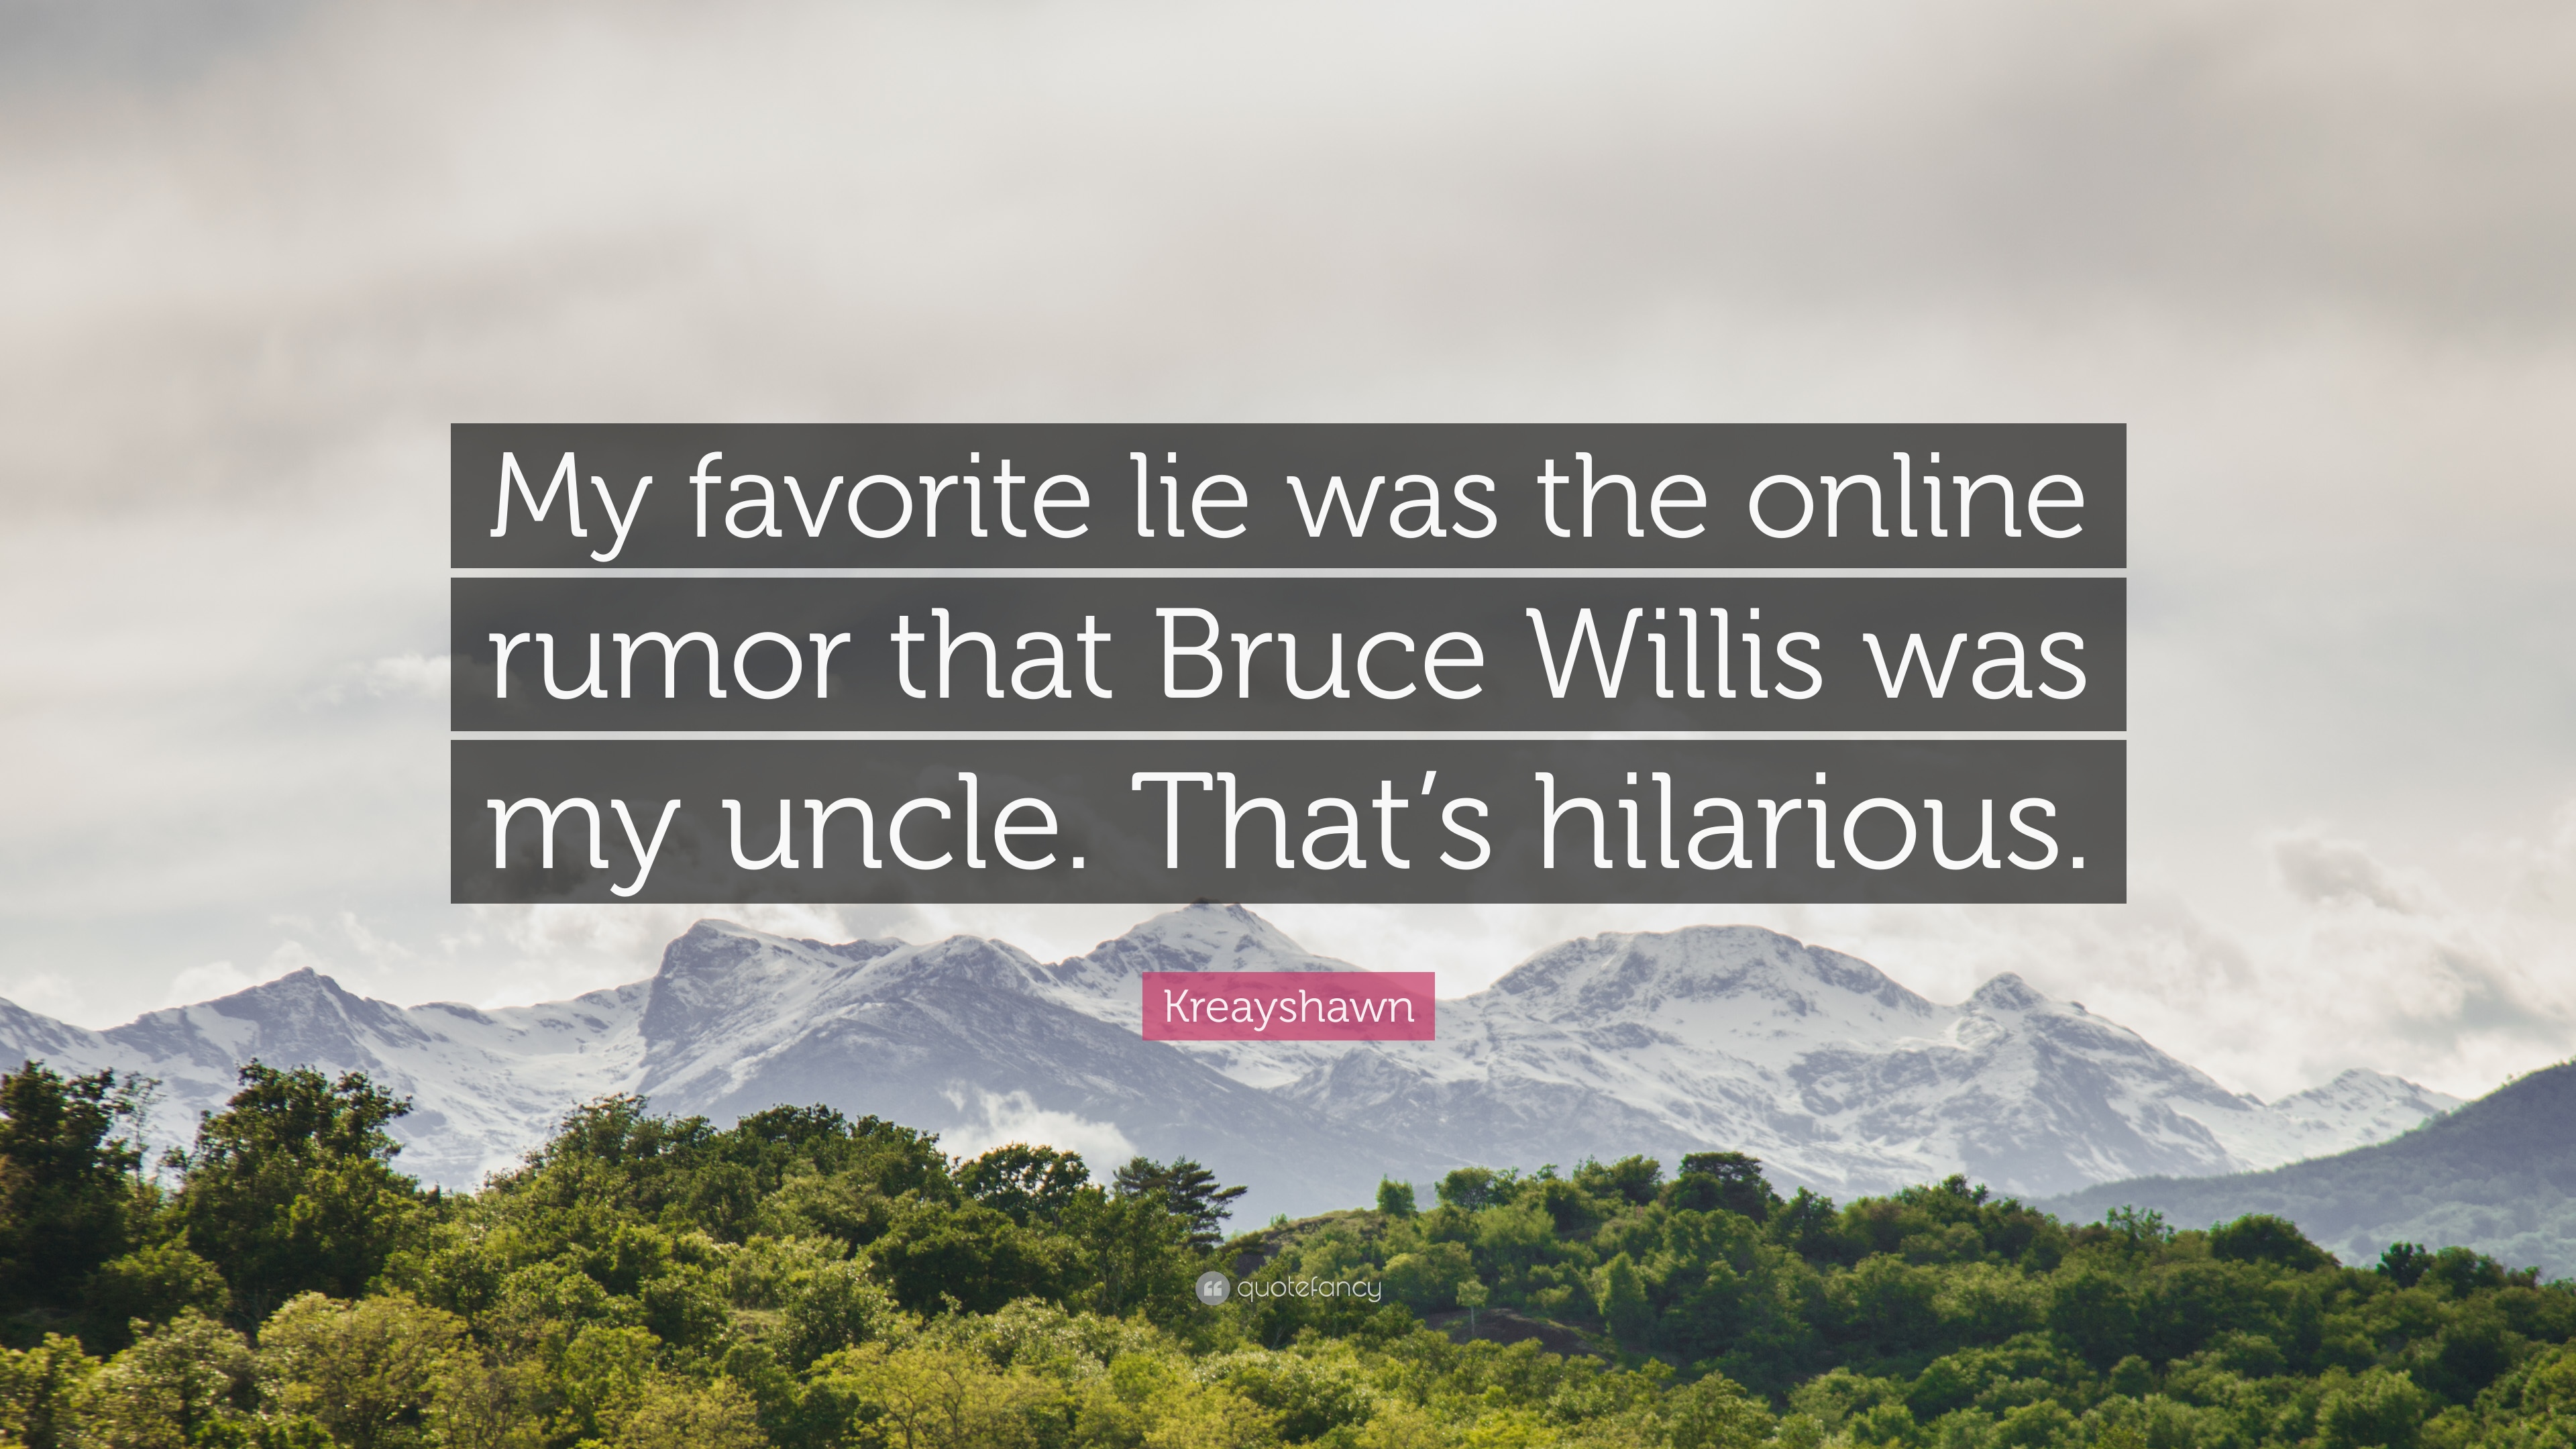 My favorite lie was the online rumor that Bruce Willis was my uncle. That’s hilarious